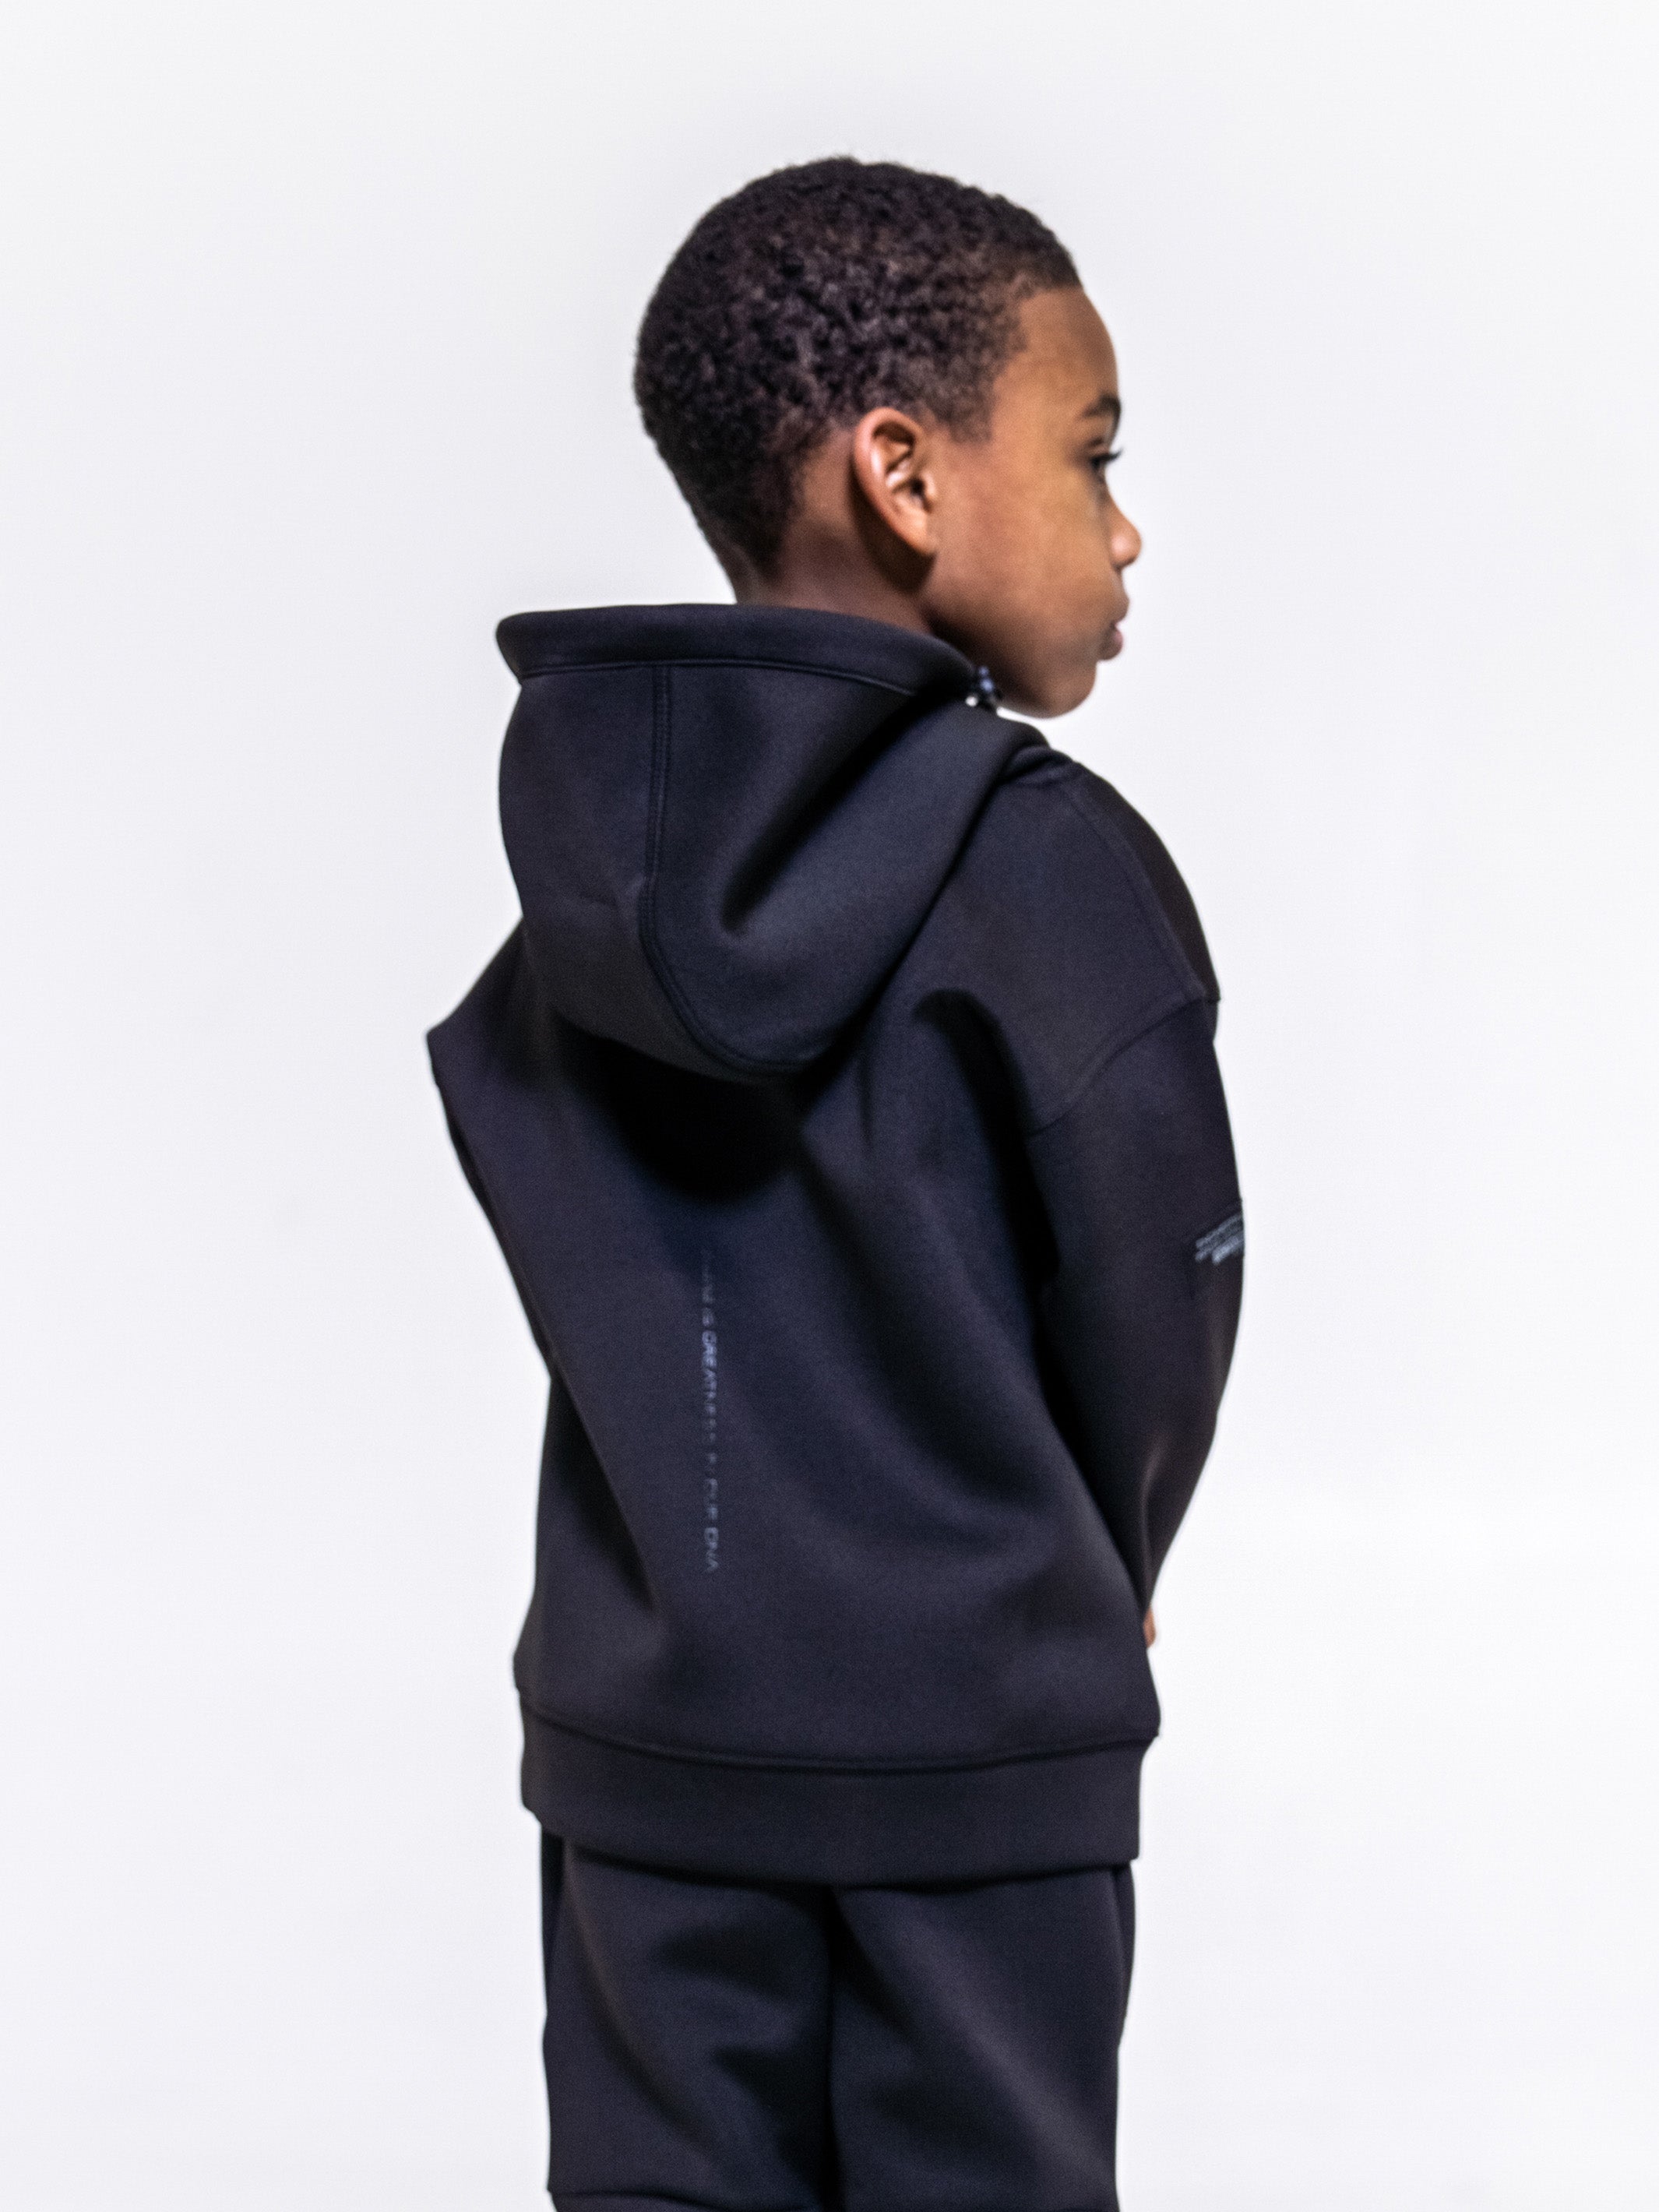 Kids Actively Black Performance Tech Hoodie